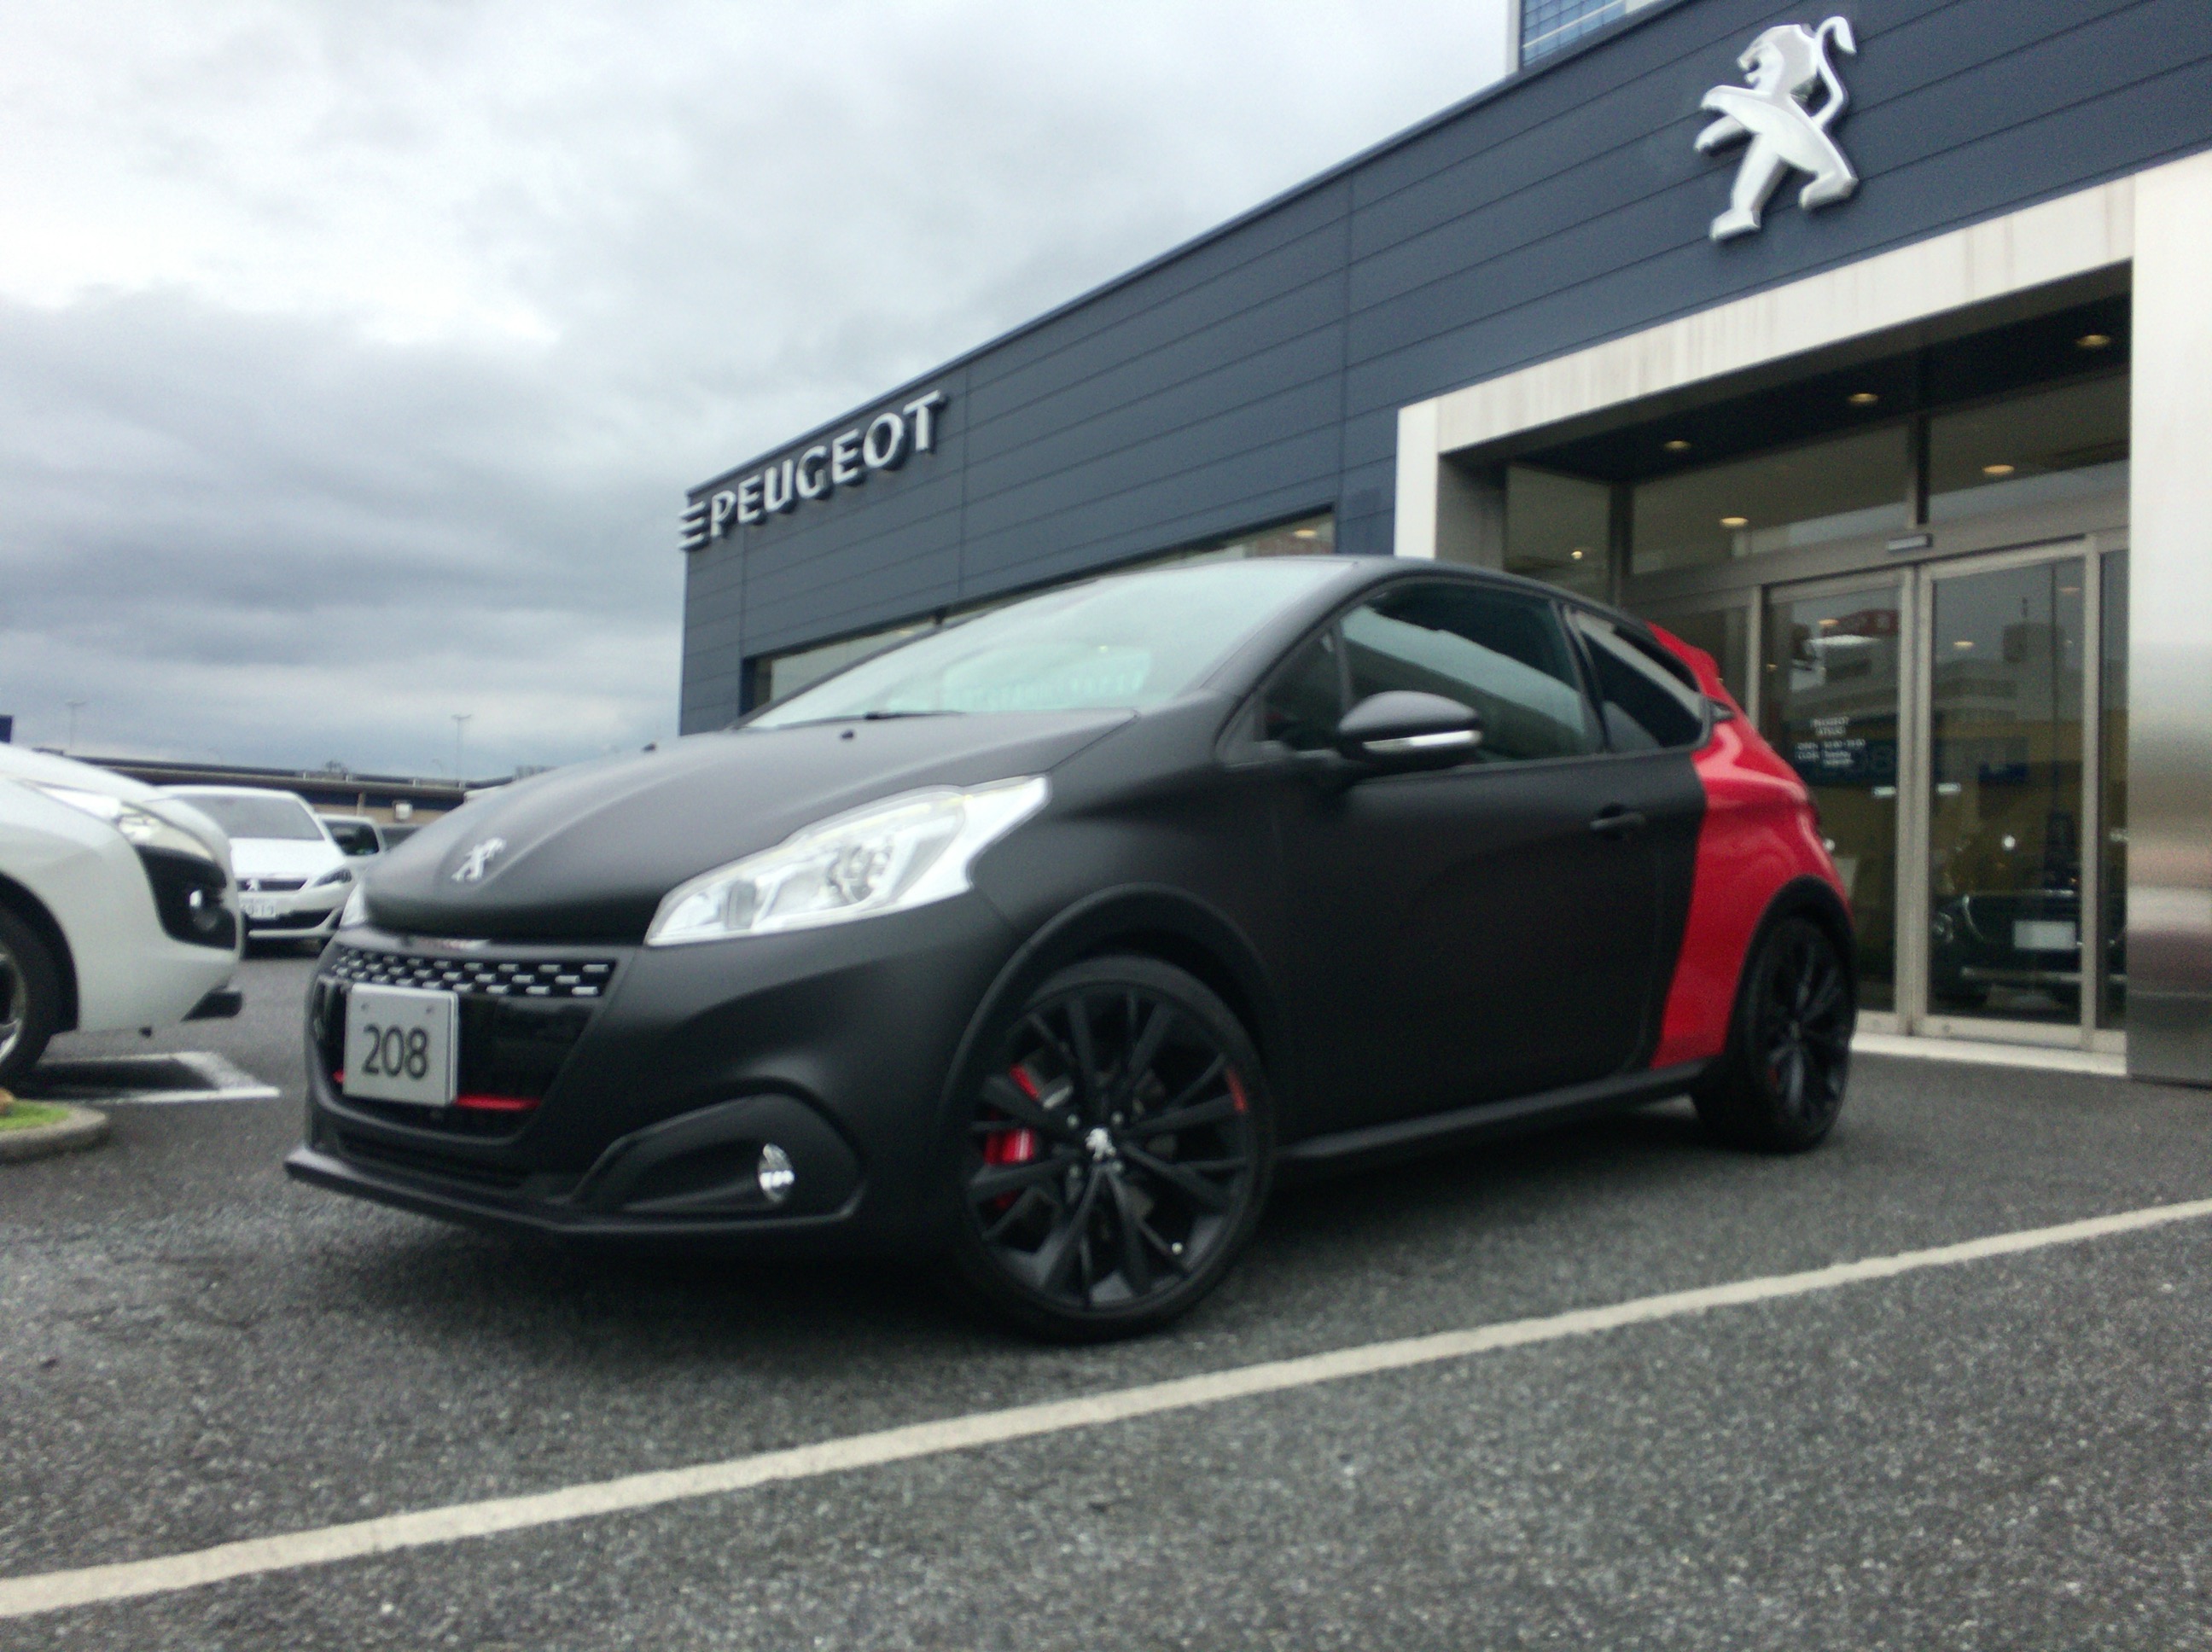 208GTi by PEUGEOT SPORT クープ・フランシュ　試乗車入りました